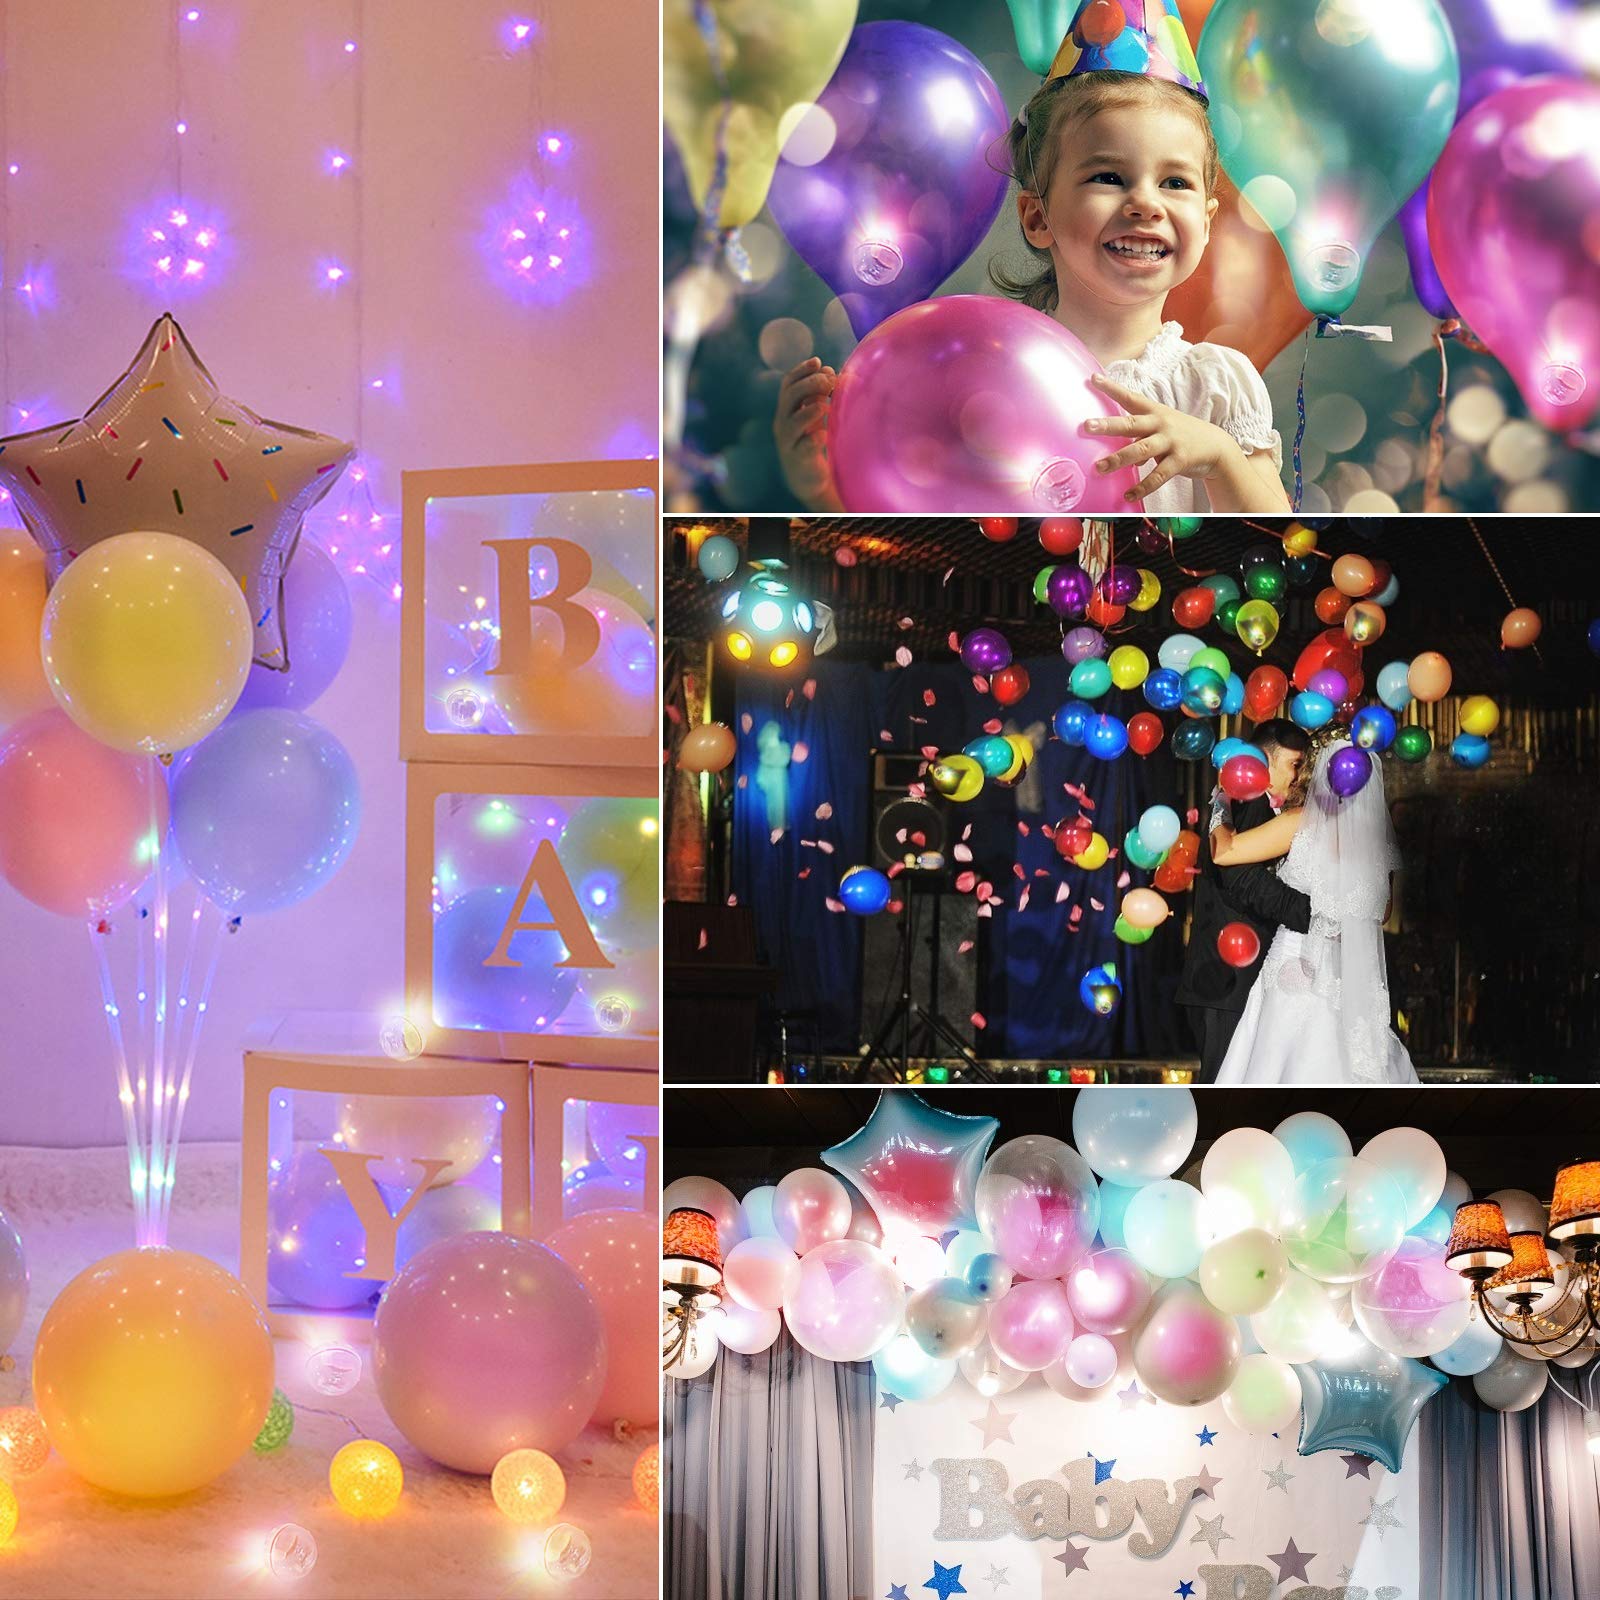 100pcs Multicolor LED Balloon Light,Rainbow Colored Round Led Flash Mini Ball Light for Paper Lantern Balloon,Indoor Outdoor Party Event Fun Birthday Party Wedding Halloween Christmas Decorations